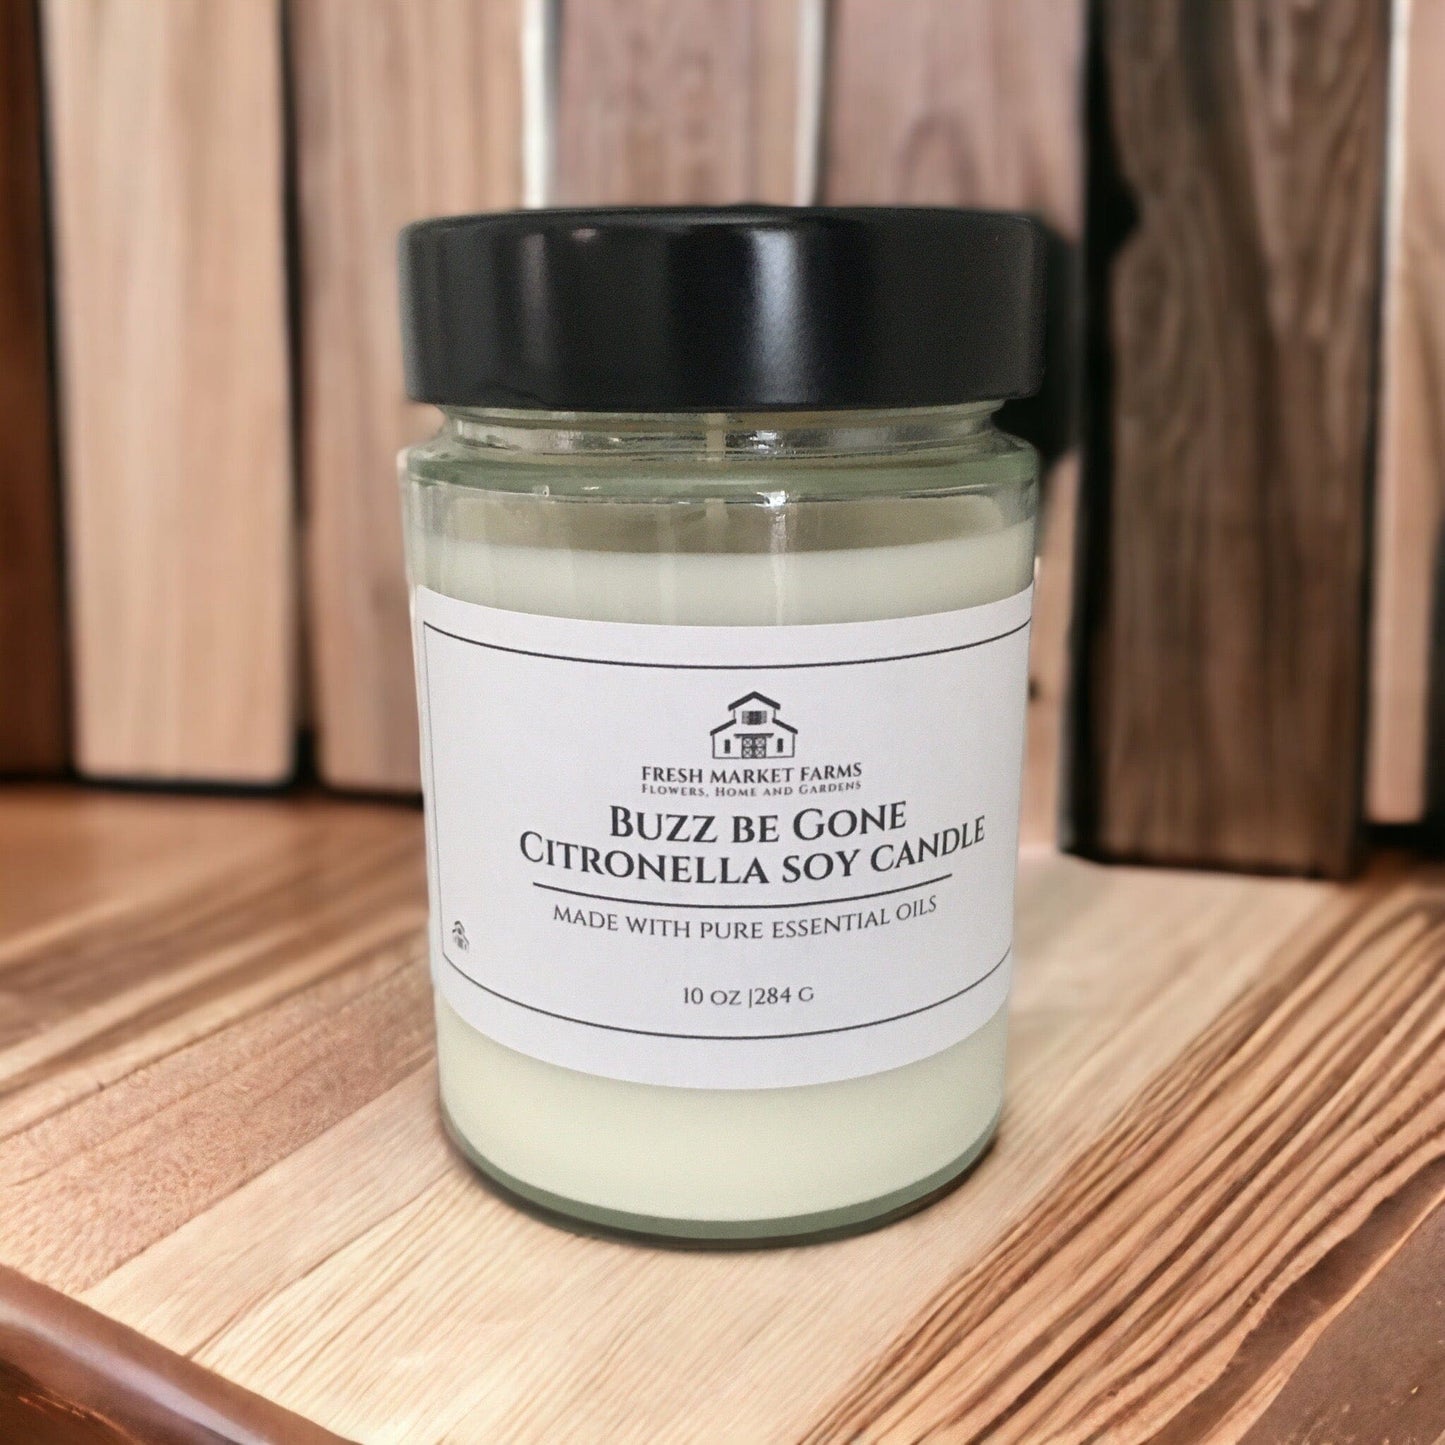 ZERO WASTE BUZZ BE GONE OUTDOOR ORGANIC CITRONELLA & LEMONGRASS HAND POURED SOY CANDLE - 10oz